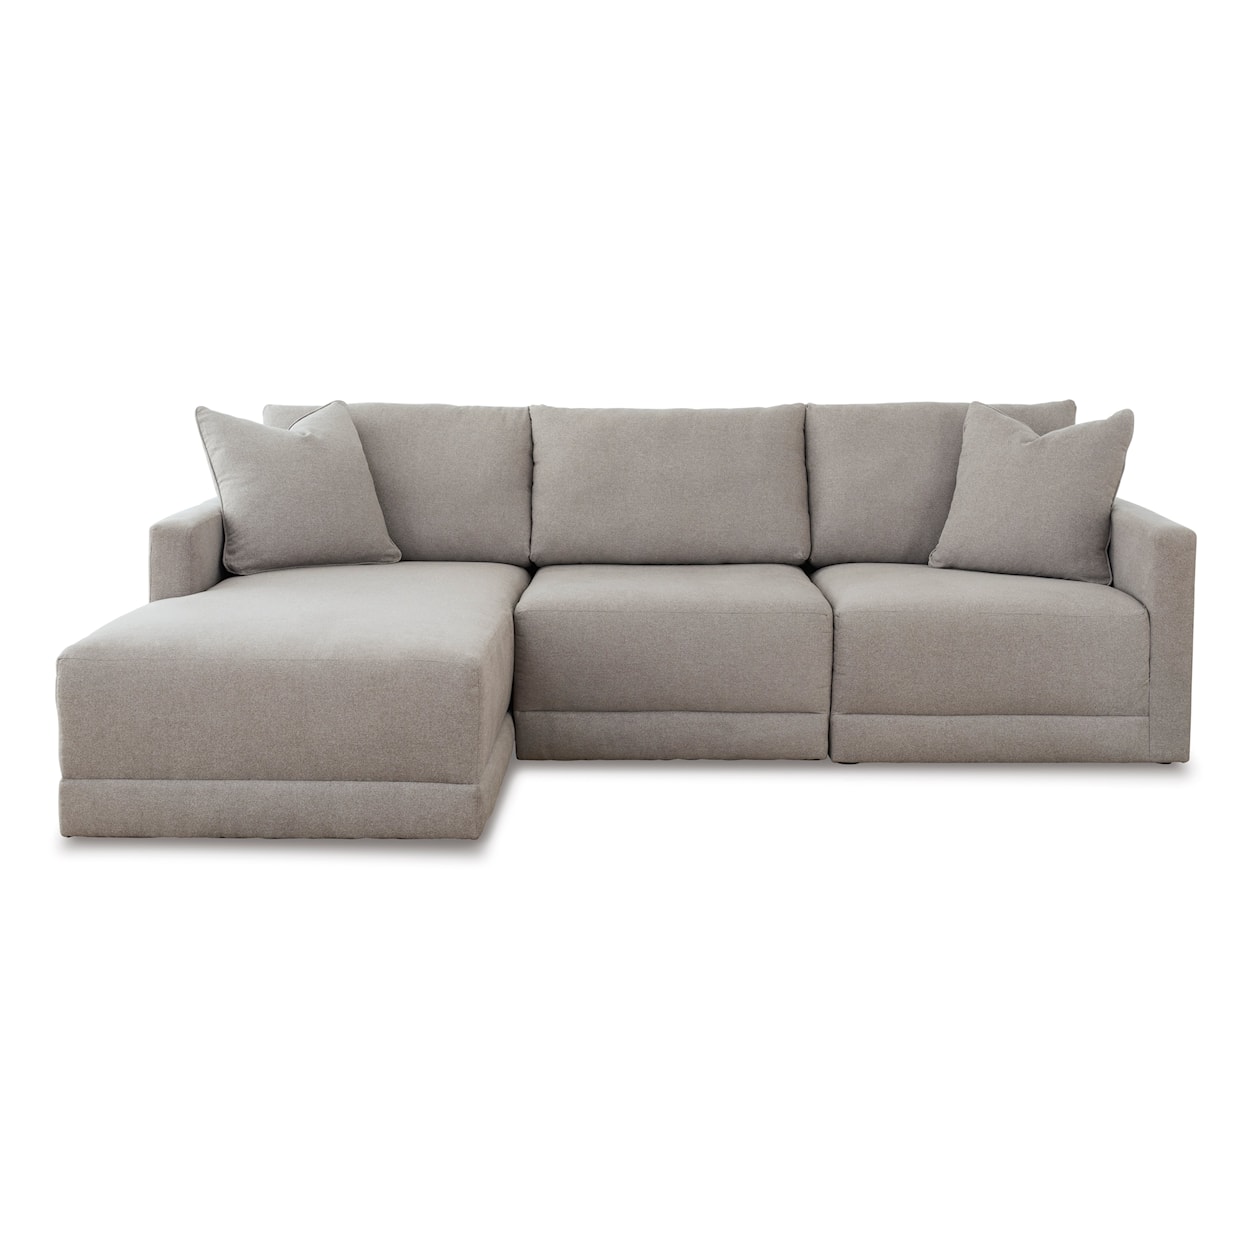 Benchcraft Katany 3-Piece Sectional with Chaise